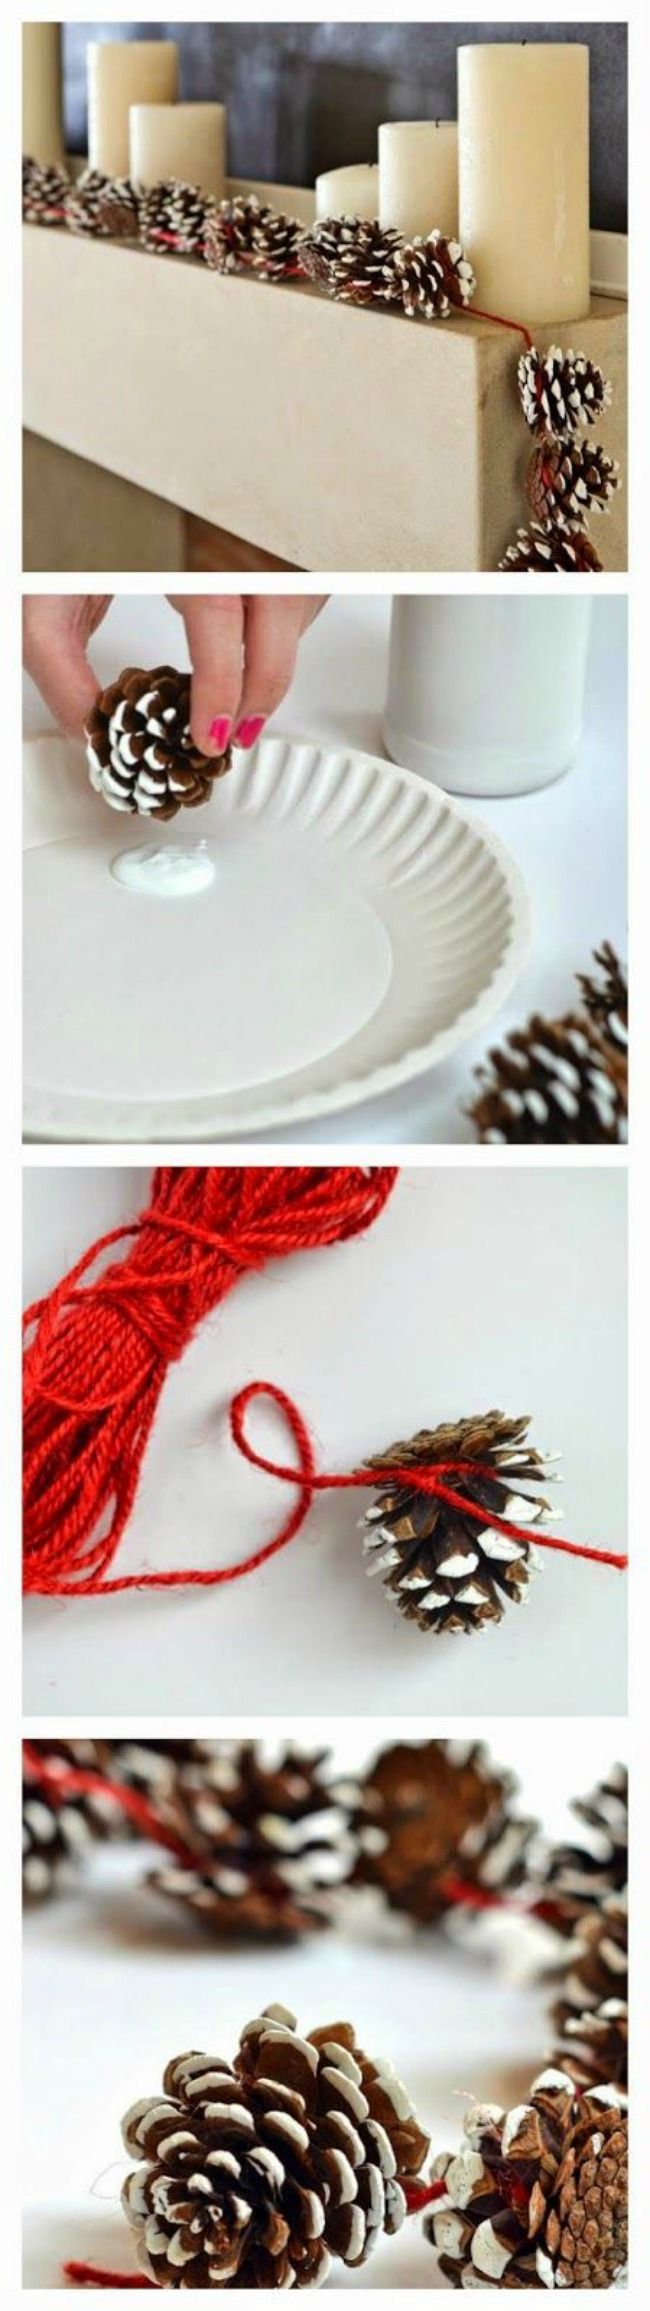 I guarantee that you are going to want to start collecting pine cones when you see these beautiful crafts to make with them. And,